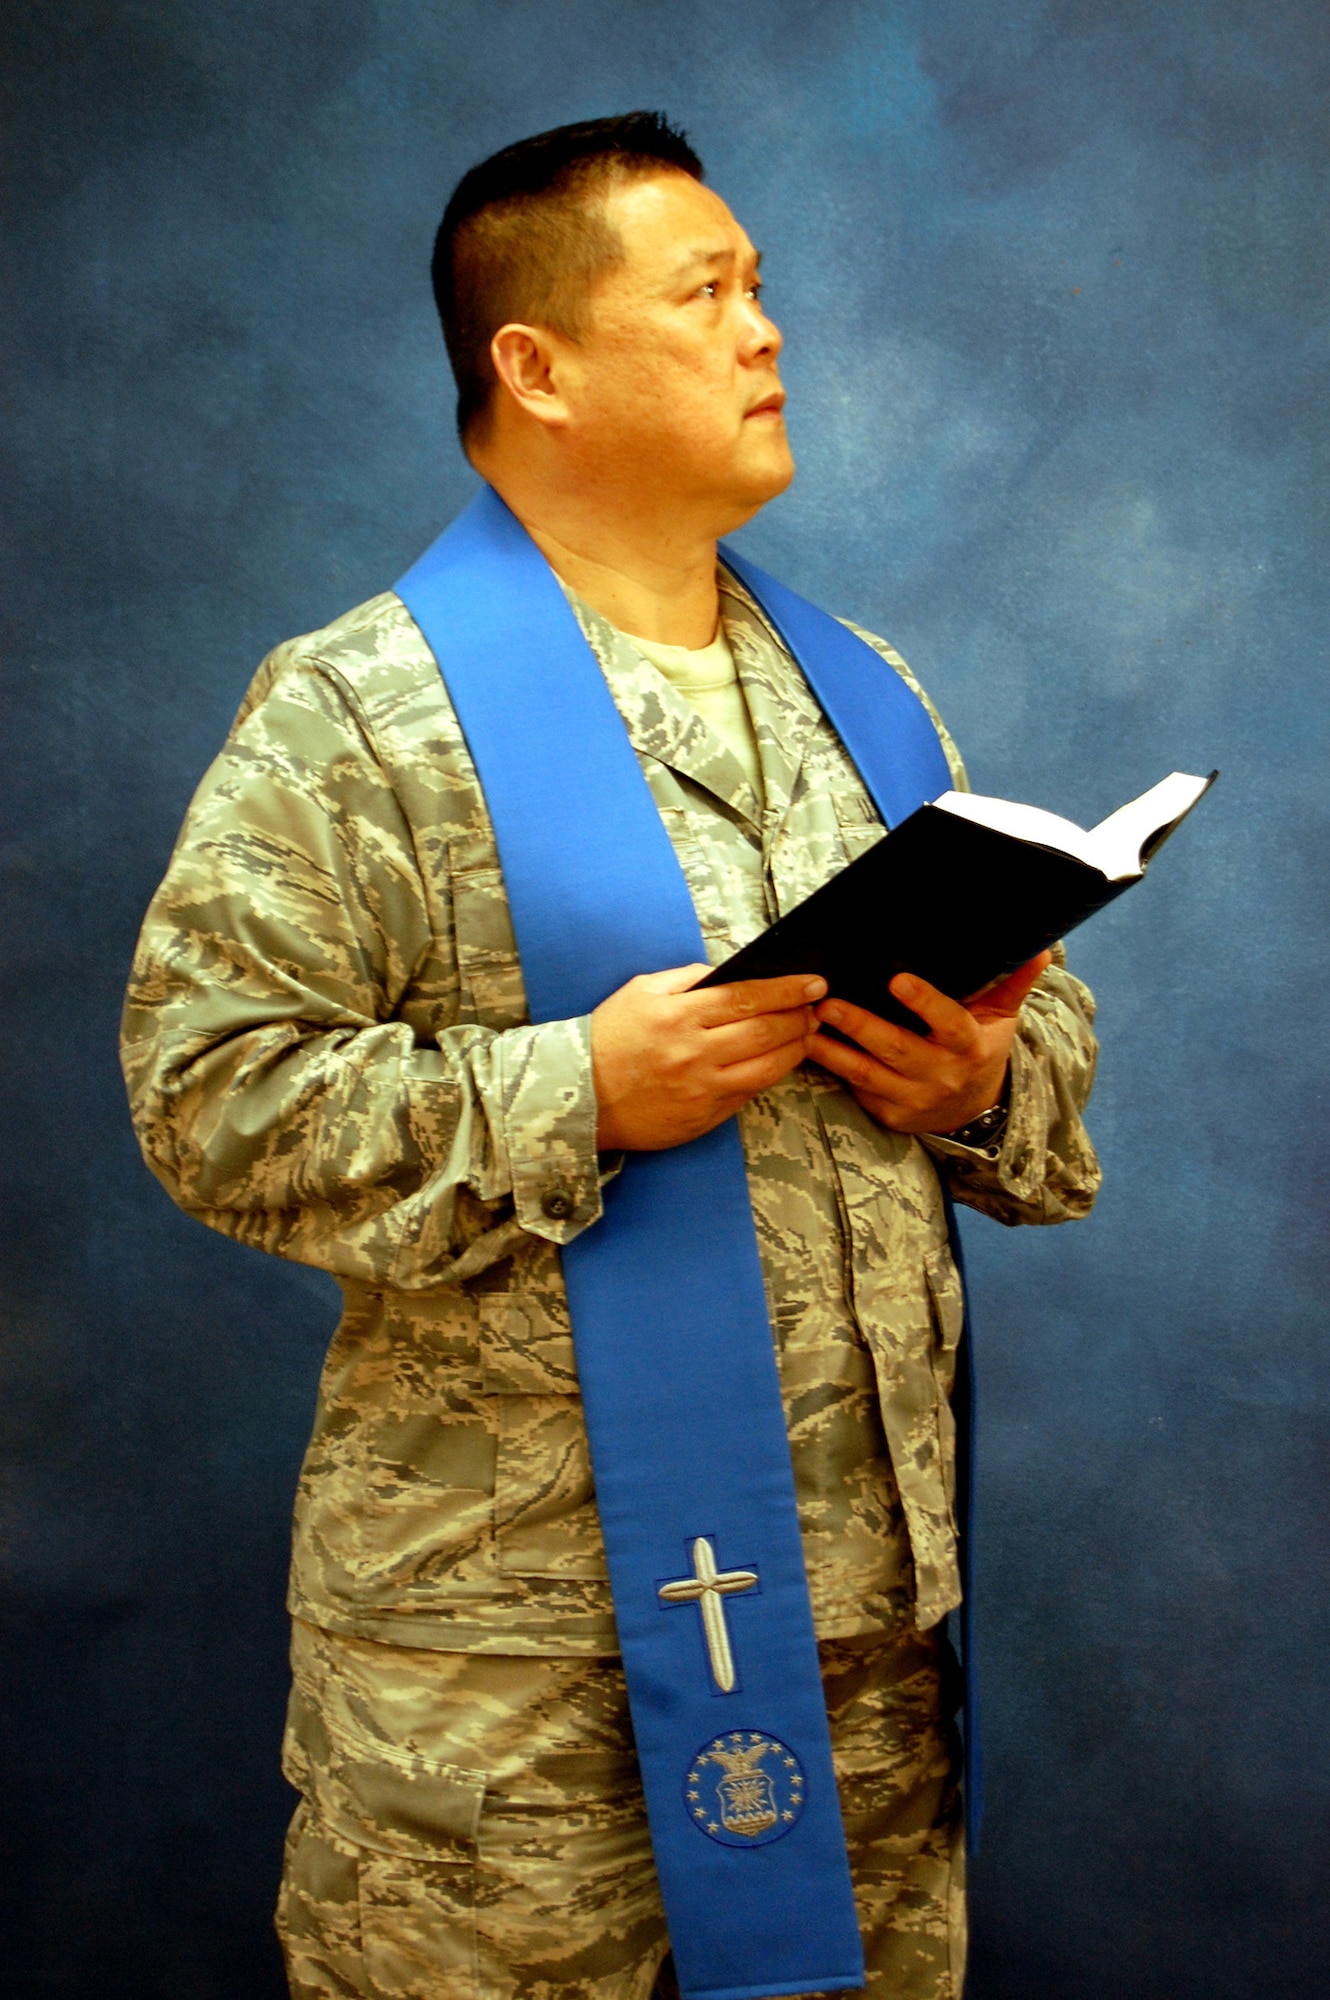 Chaplain (Lt. Col.) Joseph Lim, chaplain for the 305th Air Mobility Wing at McGuire Air Force Base, N.J., models for a photo Dec. 11, 2008, in the U.S. Air Force Expeditionary Center studio on Fort Dix, N.J.  The effort was part of preparatory work by an artist from the Air Force Art Program to complete a painting highlighting the Expeditionary Center. (U.S. Air Force Photo/Tech. Sgt. Scott T. Sturkol)